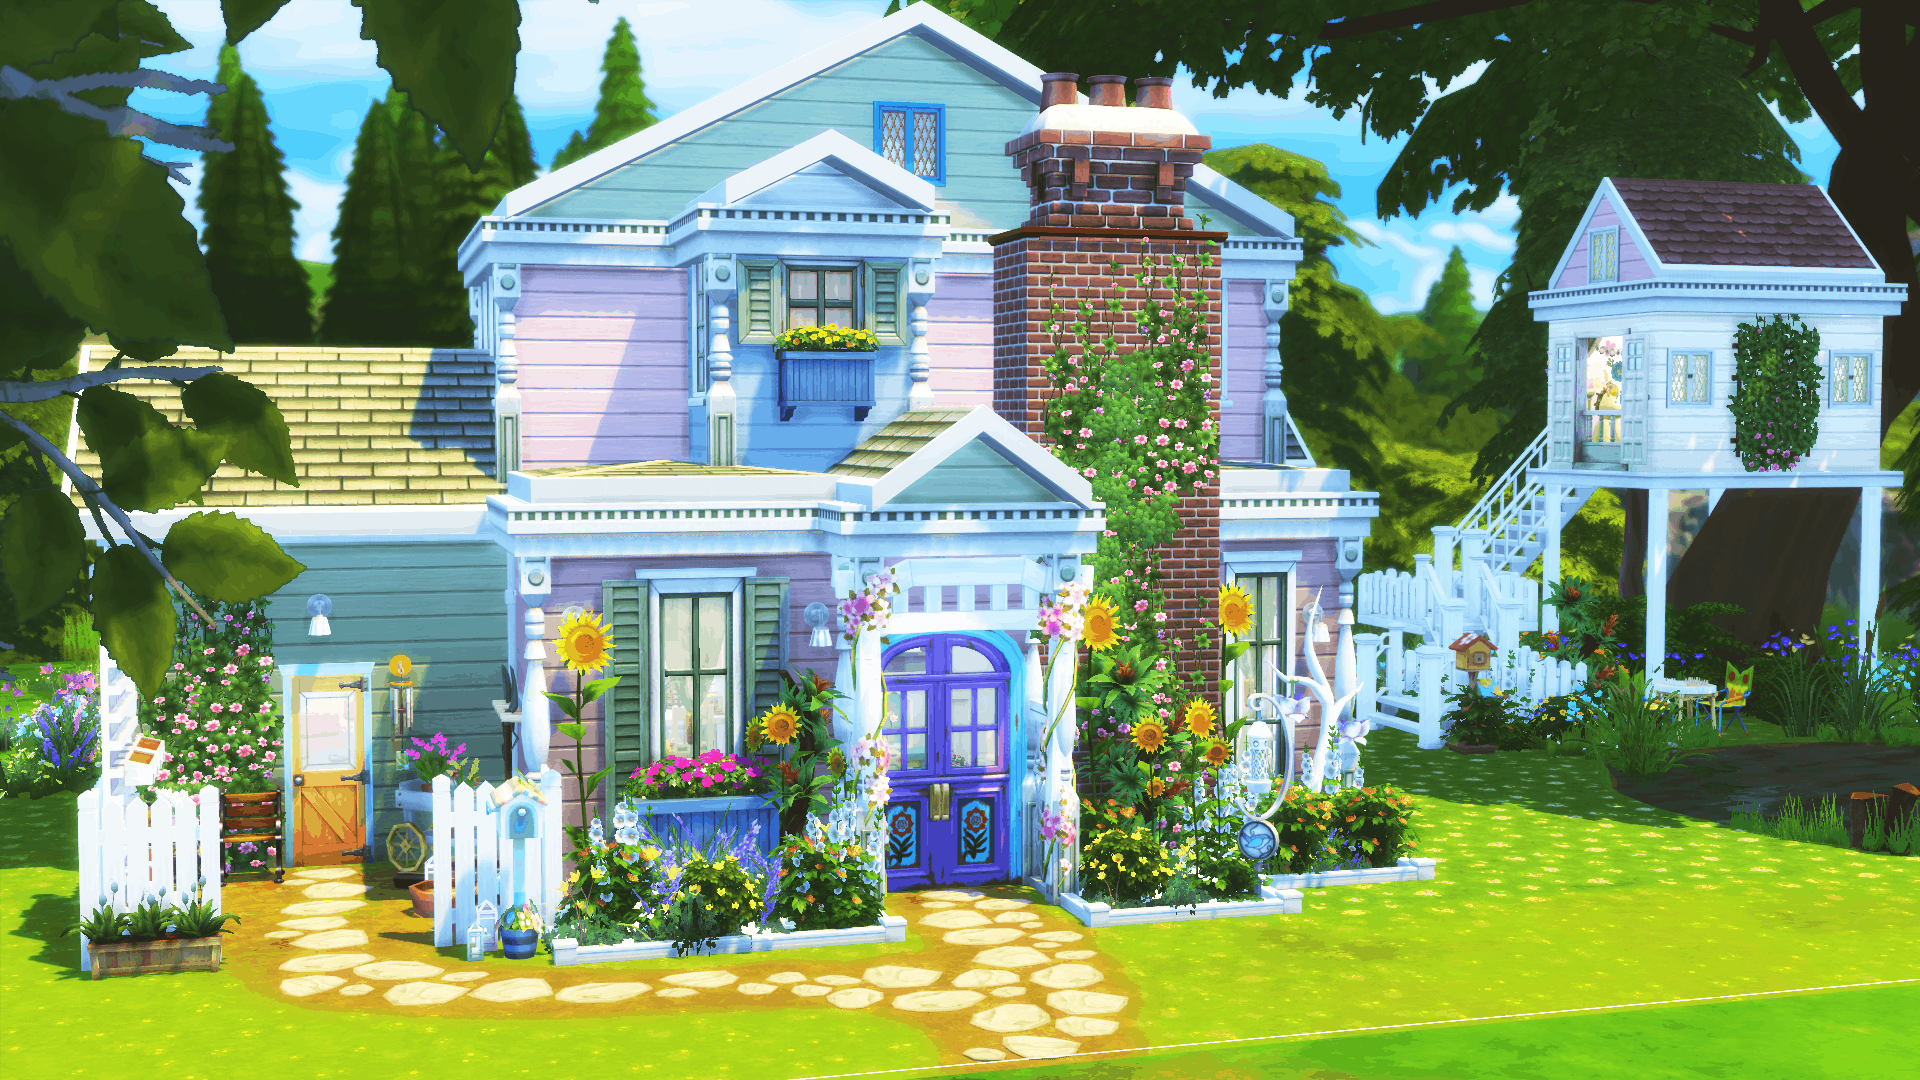 sims 4 family house download